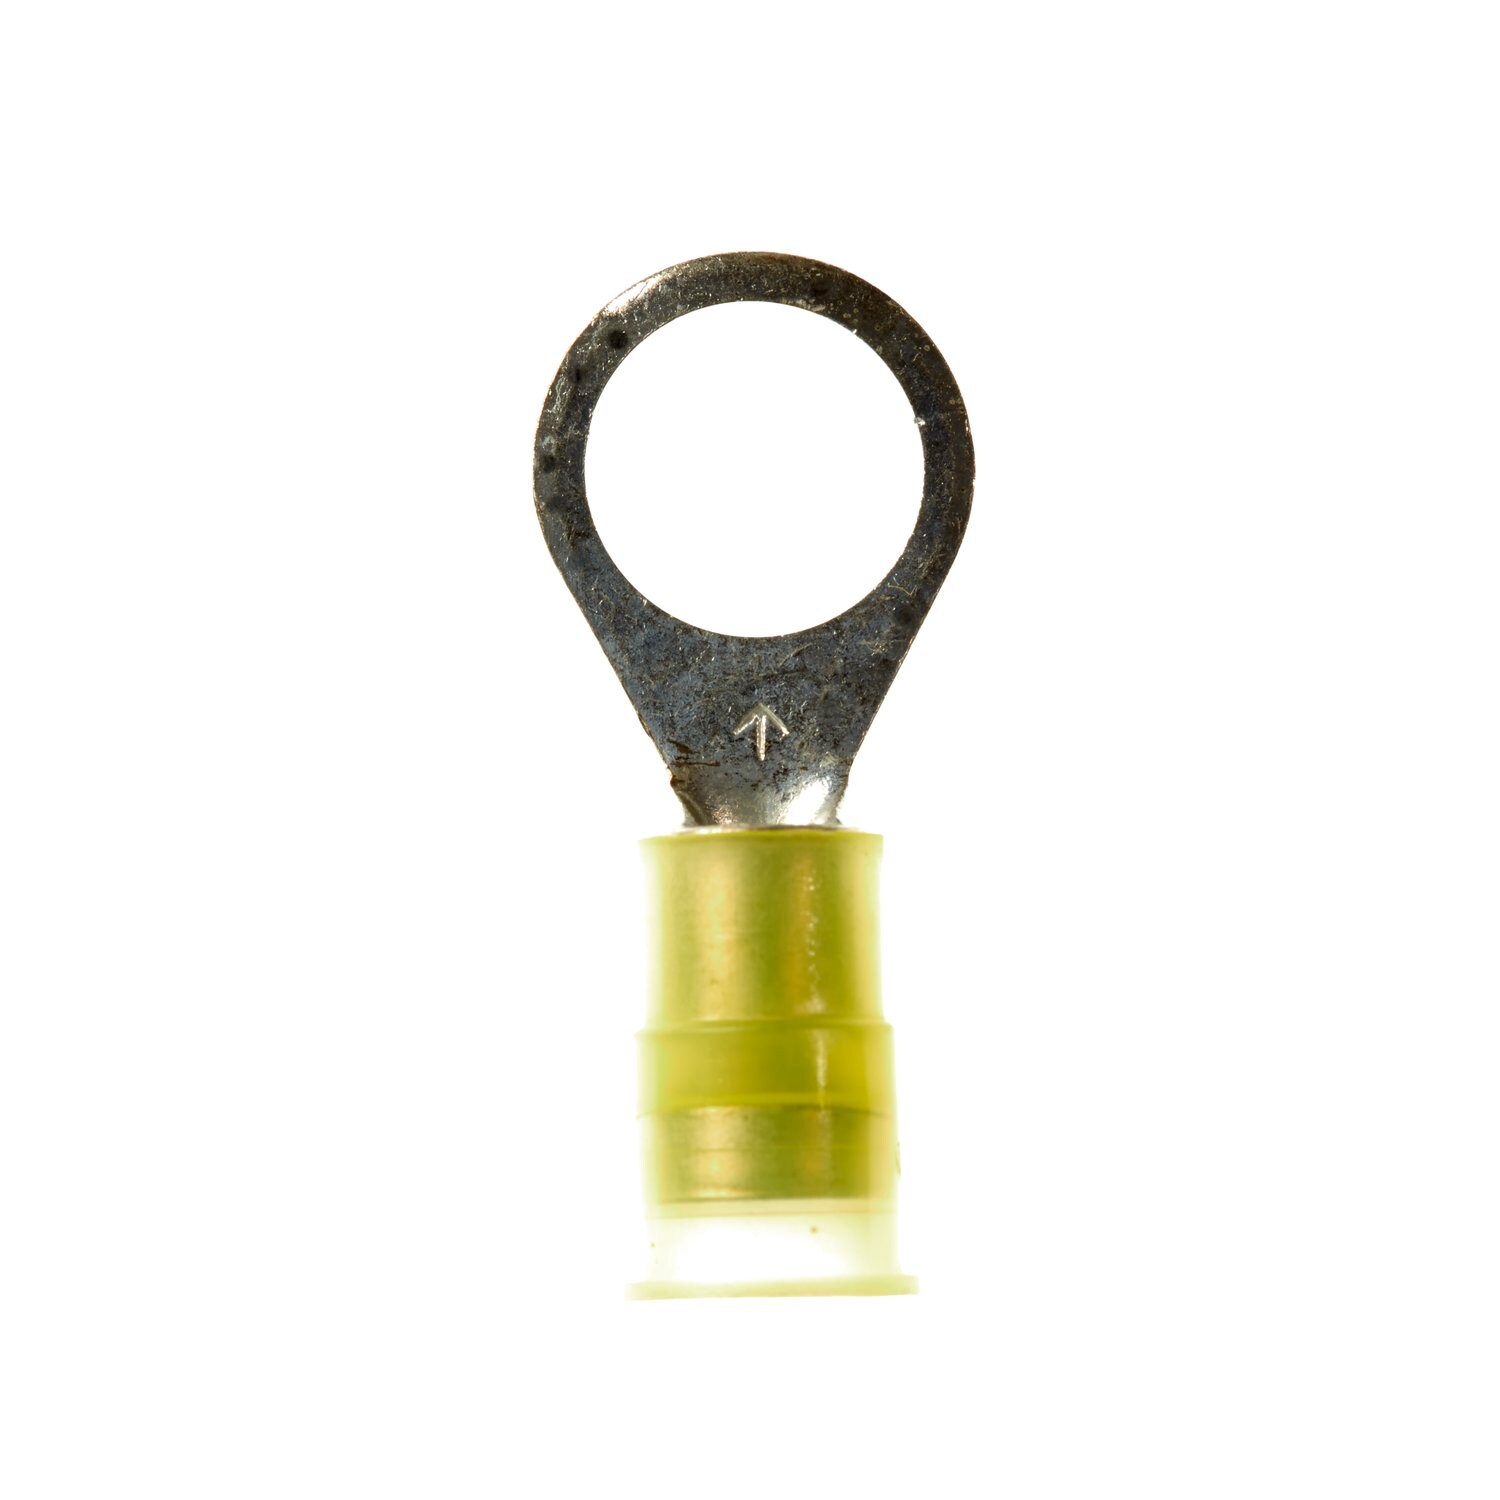 7000133423 - 3M Scotchlok Ring Nylon Insulated, 50/bottle, MNG10-38R/SX,
standard-style ring tongue fits around the stud, 500/Case